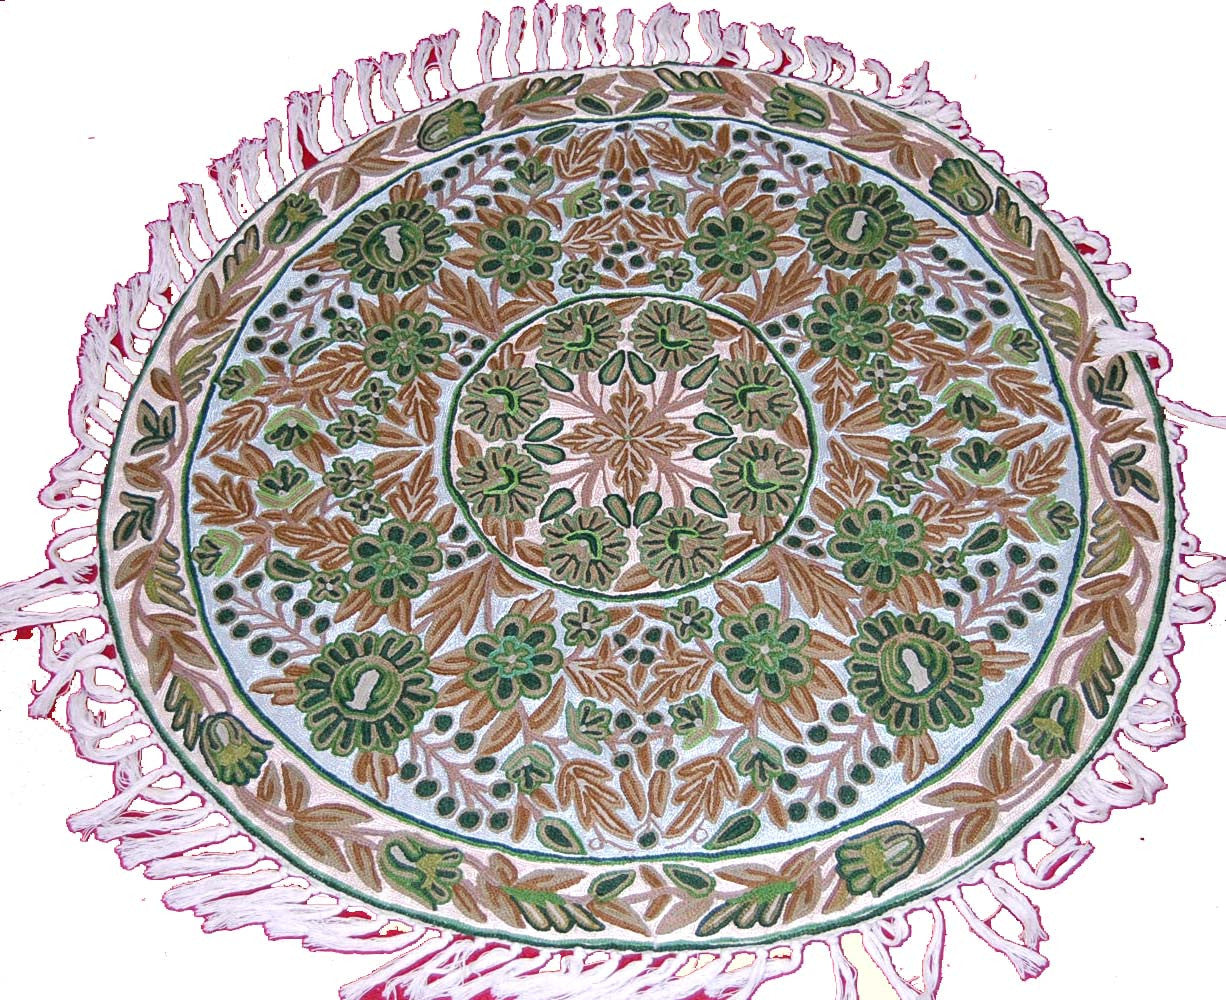 ChainStitch Tapestry Wall Hanging Area Rug,  Multicolor Embroidery 3 feet Round #CWR9201